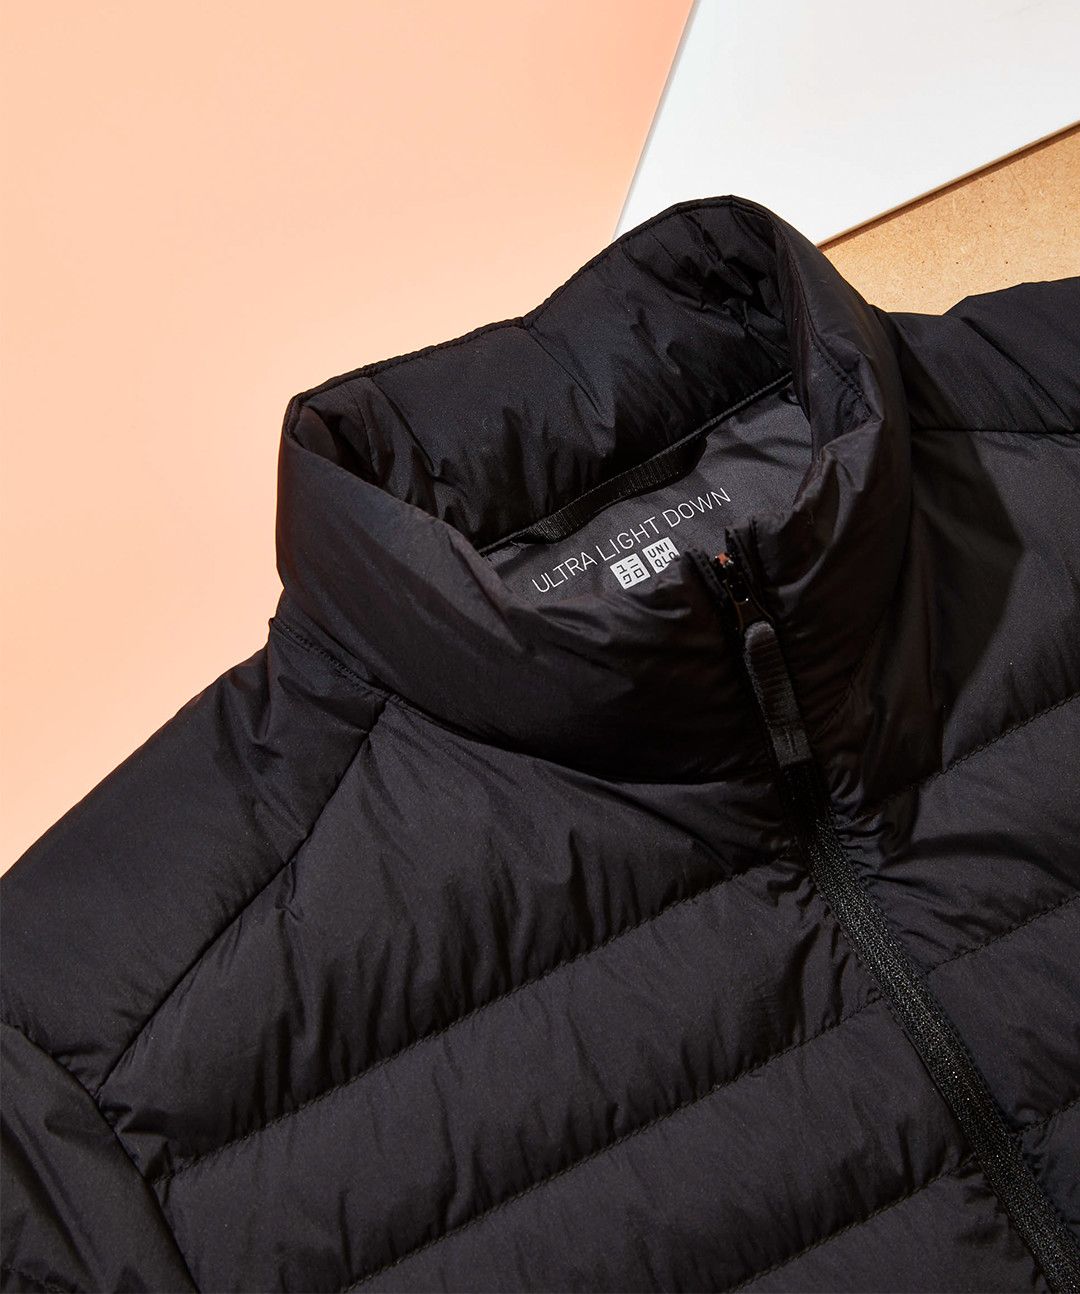 Uniqlo Ultralight Down Jacket Review  Packing Less